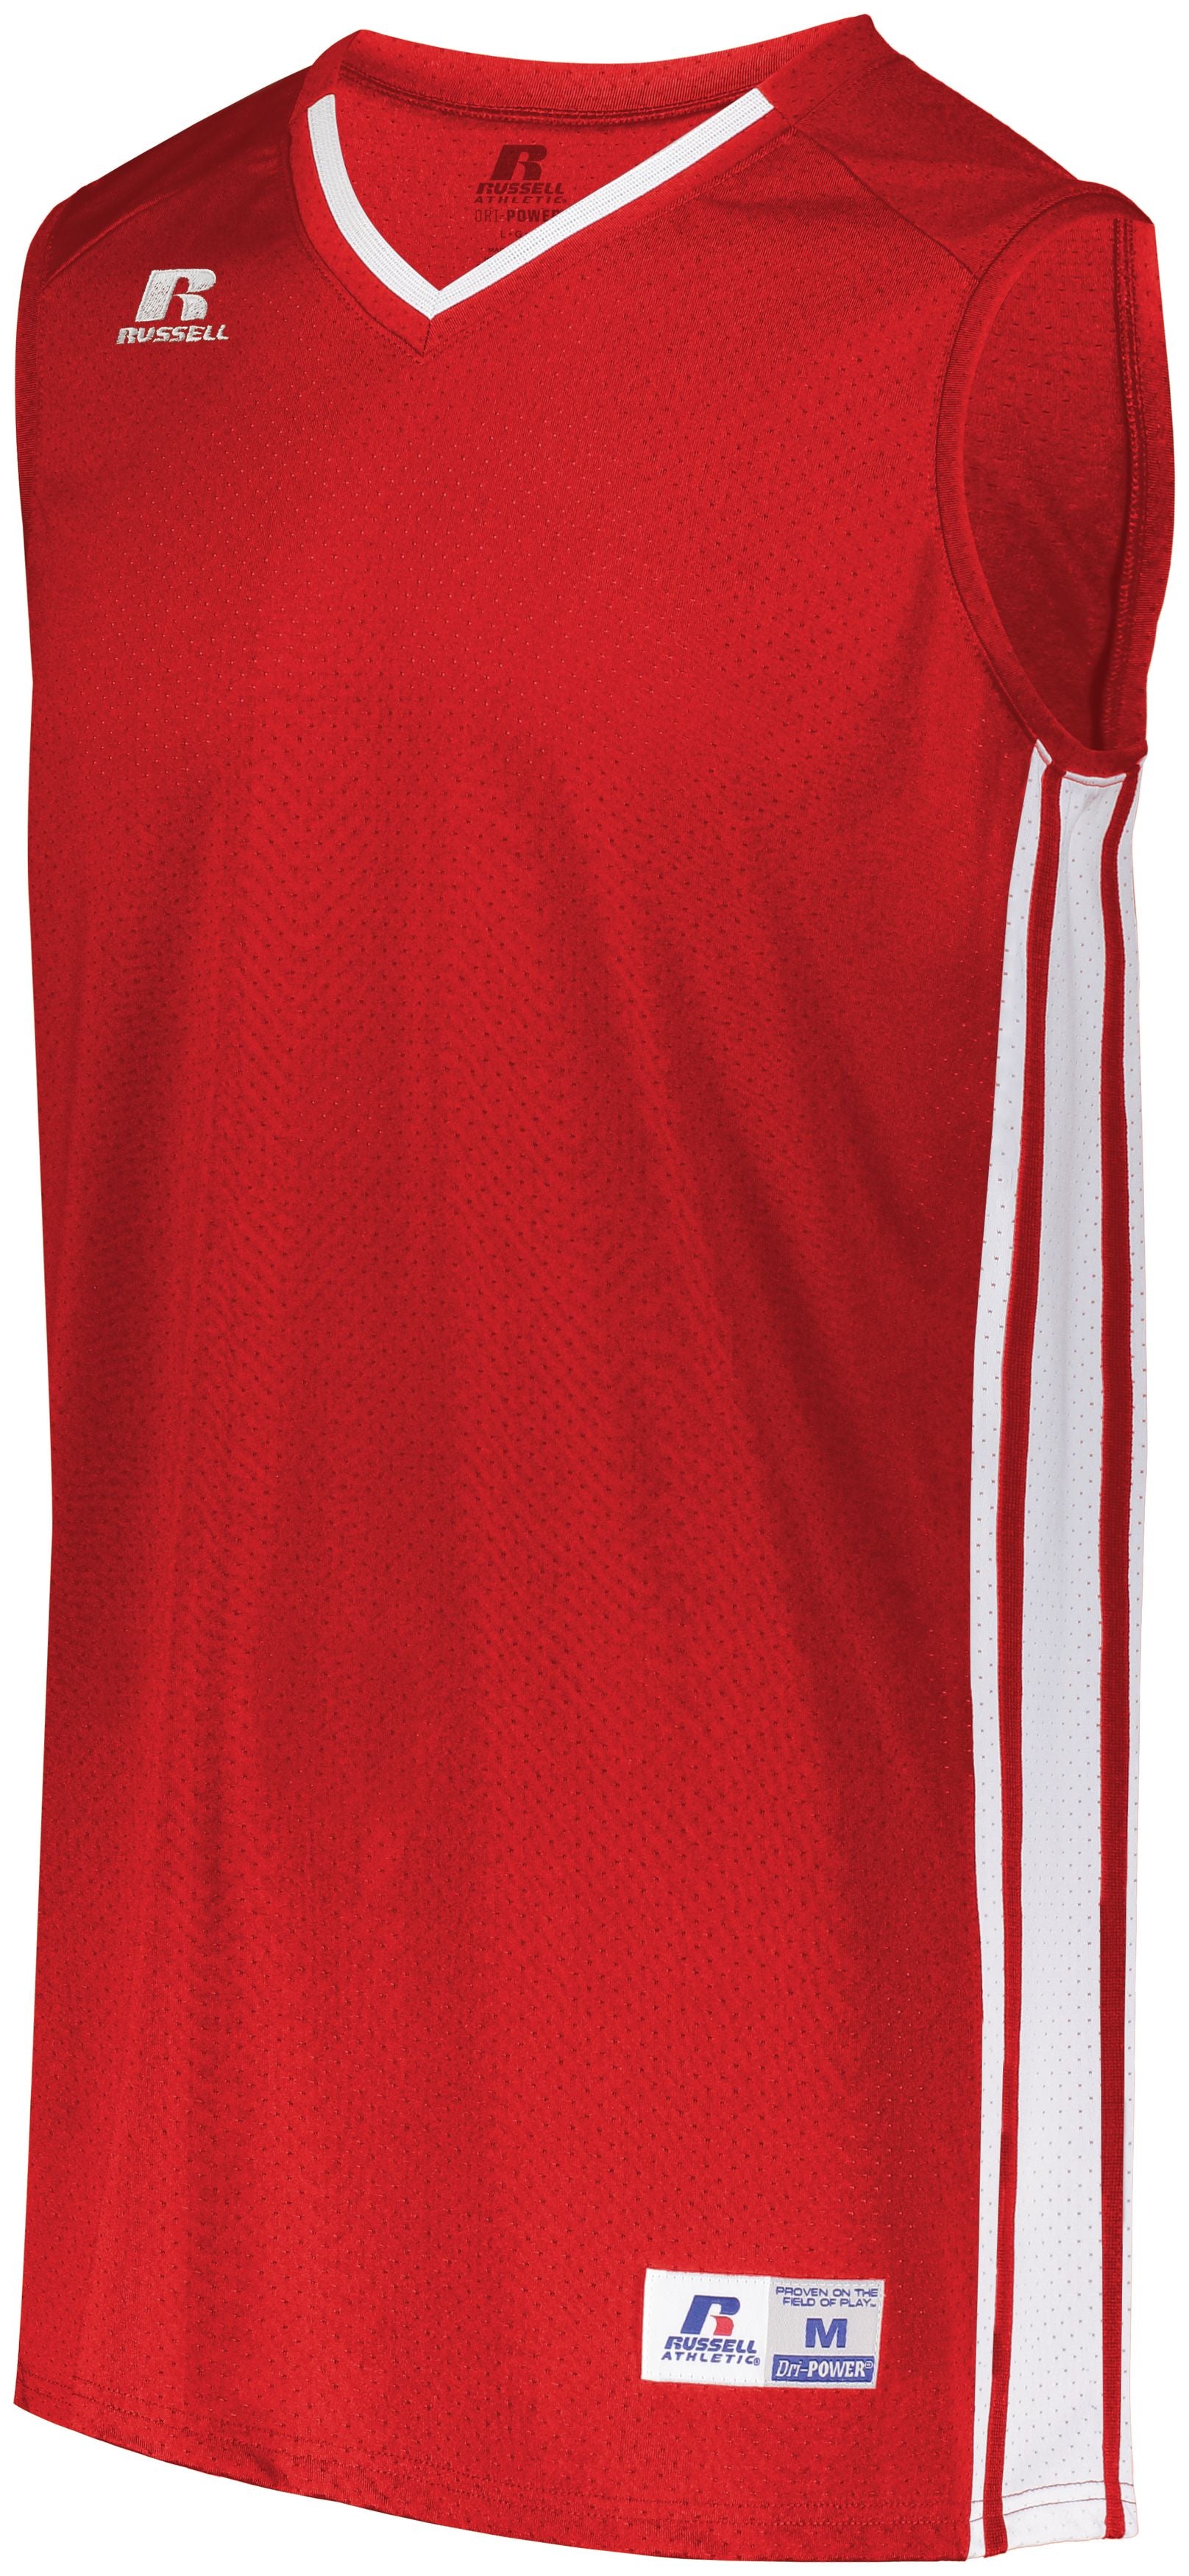 Russell Athletic Legacy Basketball Jersey in True Red/White  -Part of the Adult, Adult-Jersey, Basketball, Russell-Athletic-Products, Shirts, All-Sports, All-Sports-1 product lines at KanaleyCreations.com